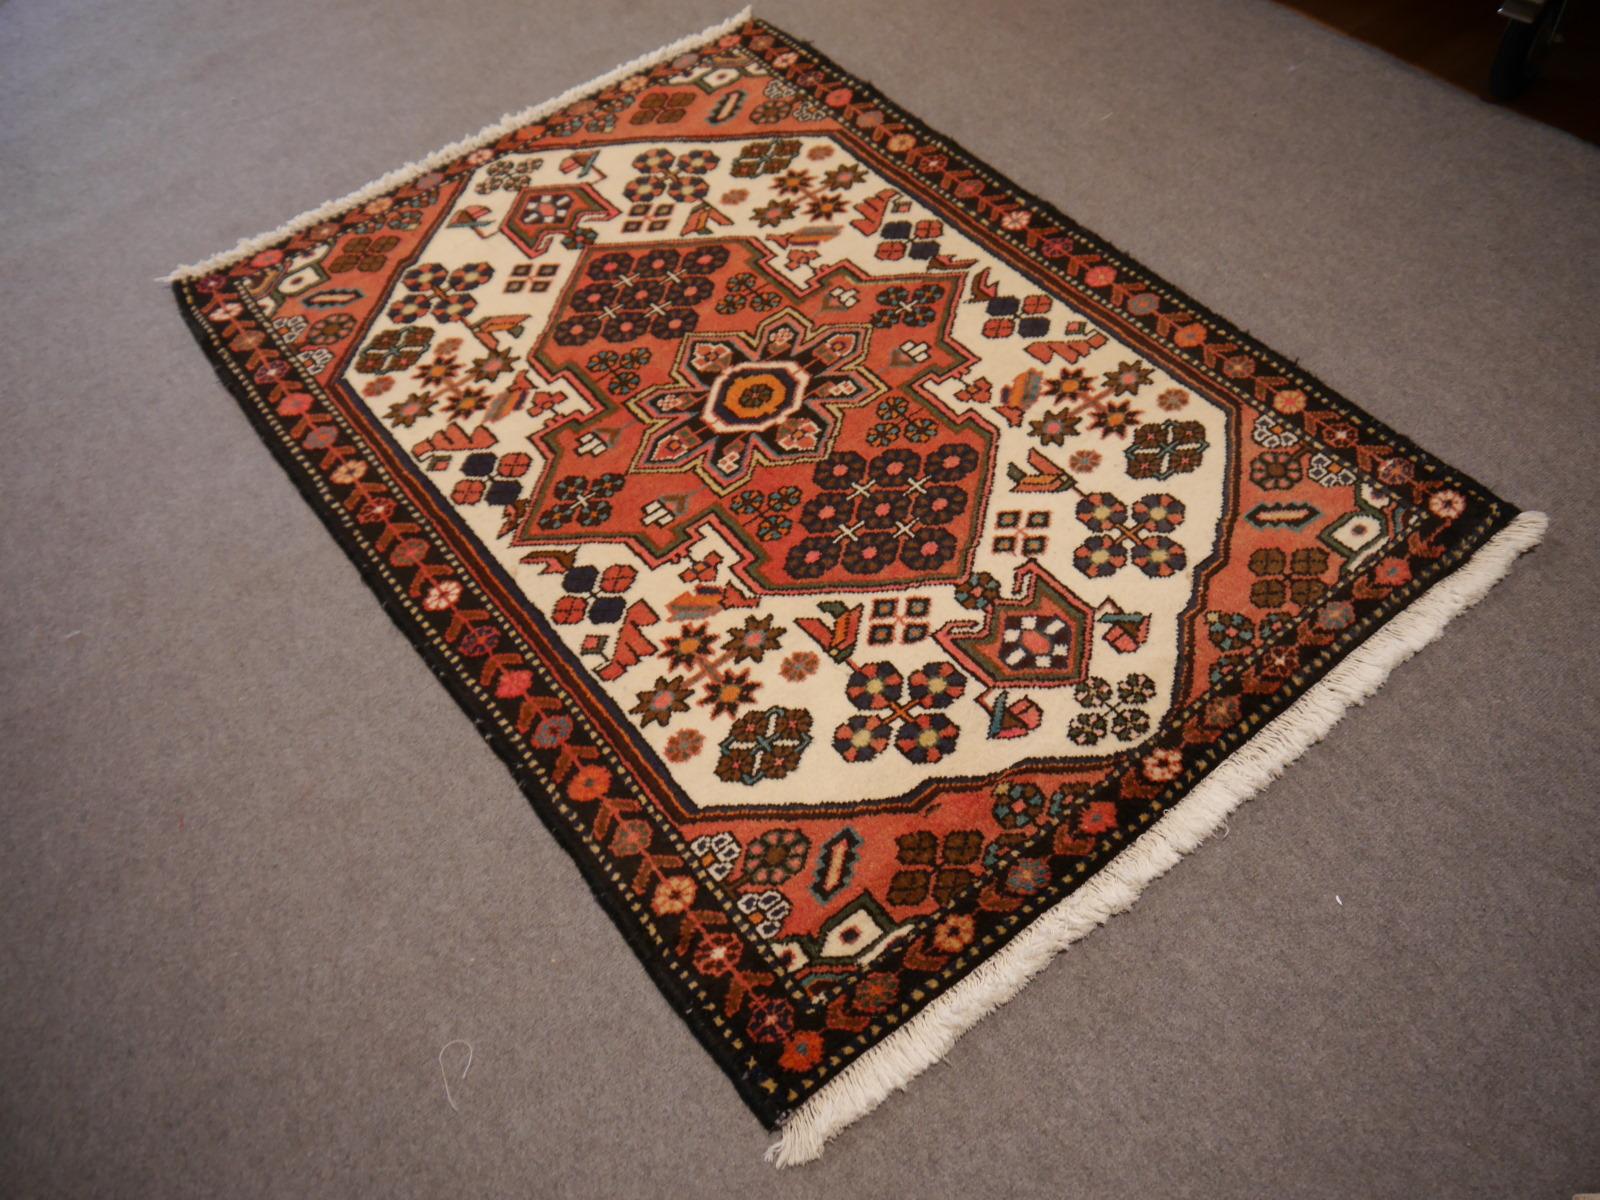 Traditional classic vintage rug wool hand knotted semi antique carpet Midcentury. Rustic design, typical village production.

Design: Medaillon
Pile: Wool
Warp: Cotton
Style: Traditional, Art Deco, European, Edwardian, Victorian
Length: 5.1 ft, 155